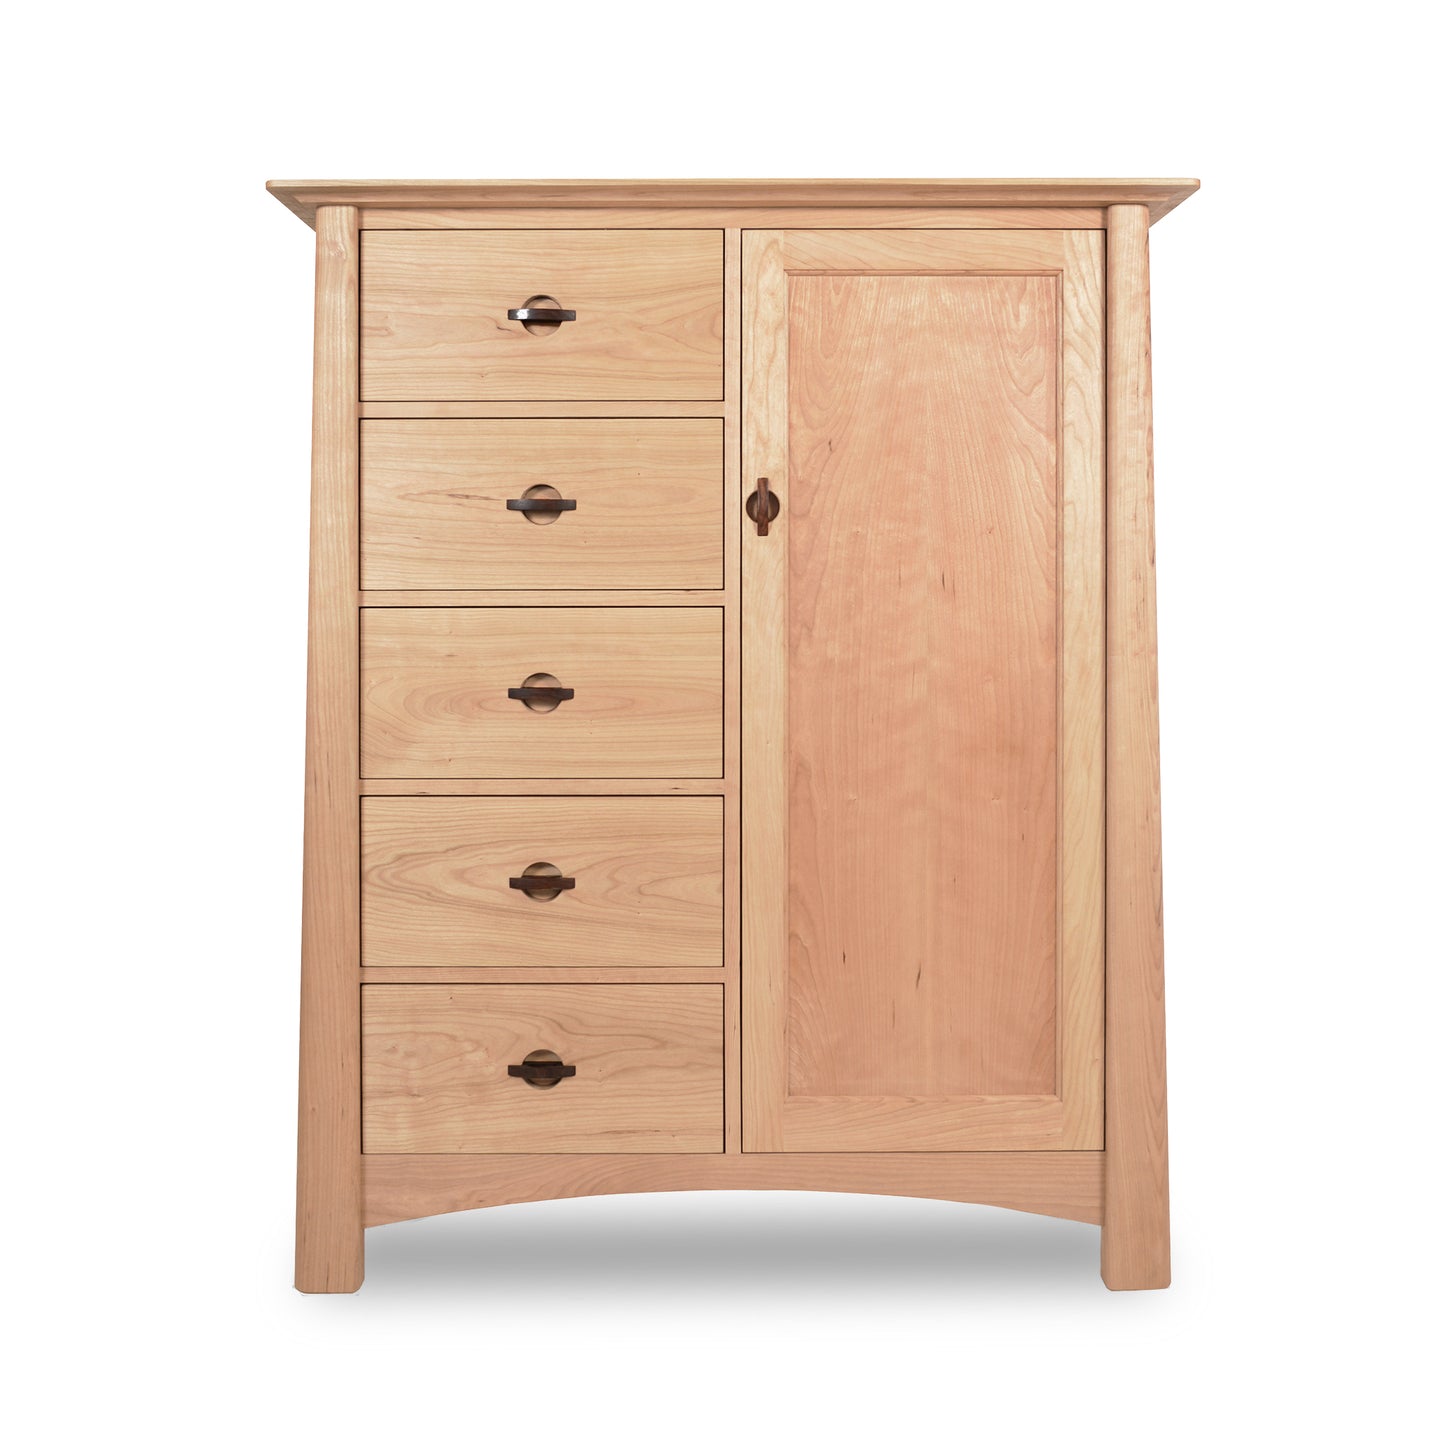 A Maple Corner Woodworks Cherry Moon Sweater Chest crafted from sustainably harvested wood, featuring a single door on the right and four drawers on the left, each fitted with a metal handle, against a white background